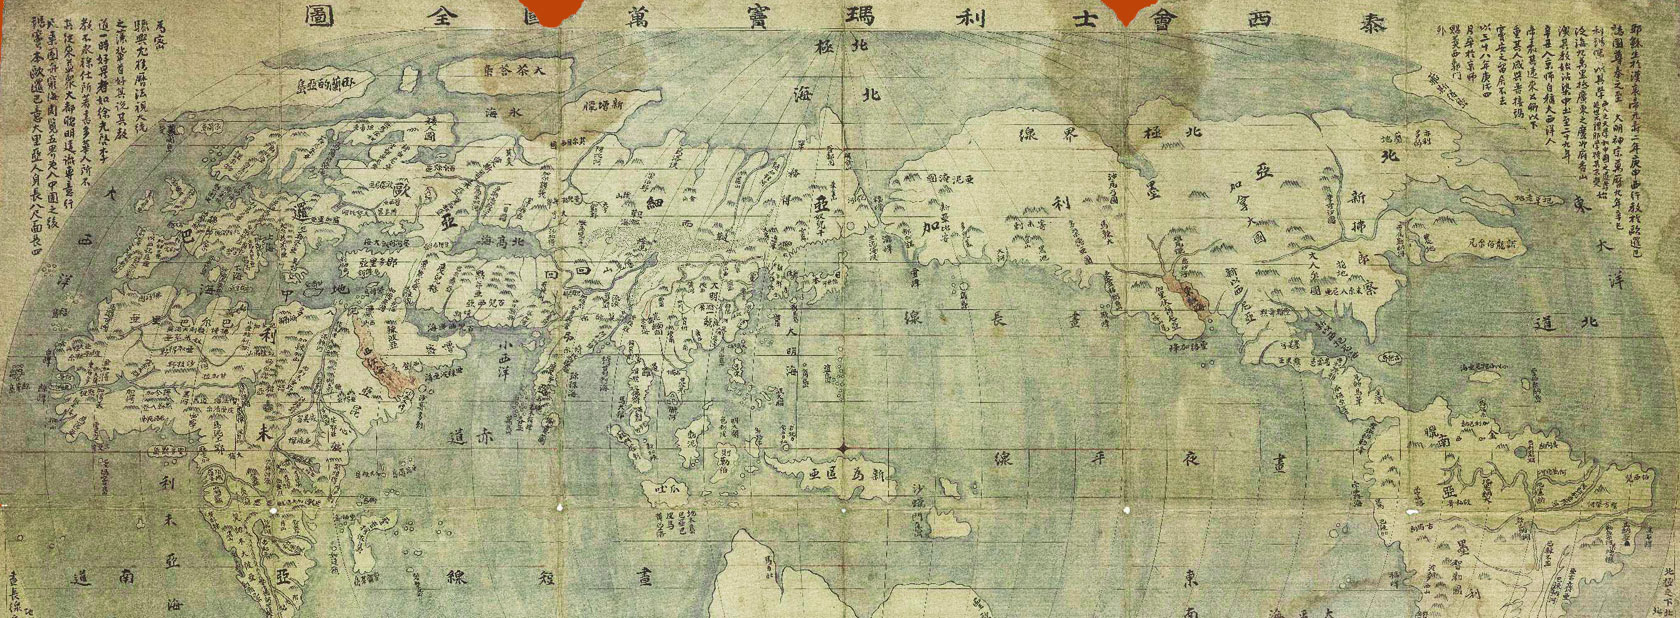 The Map of the World - The map of the world which Gunam produced was Western pattern, and shows words <泰西會士利瑪竇萬國全圖> at the top of it.